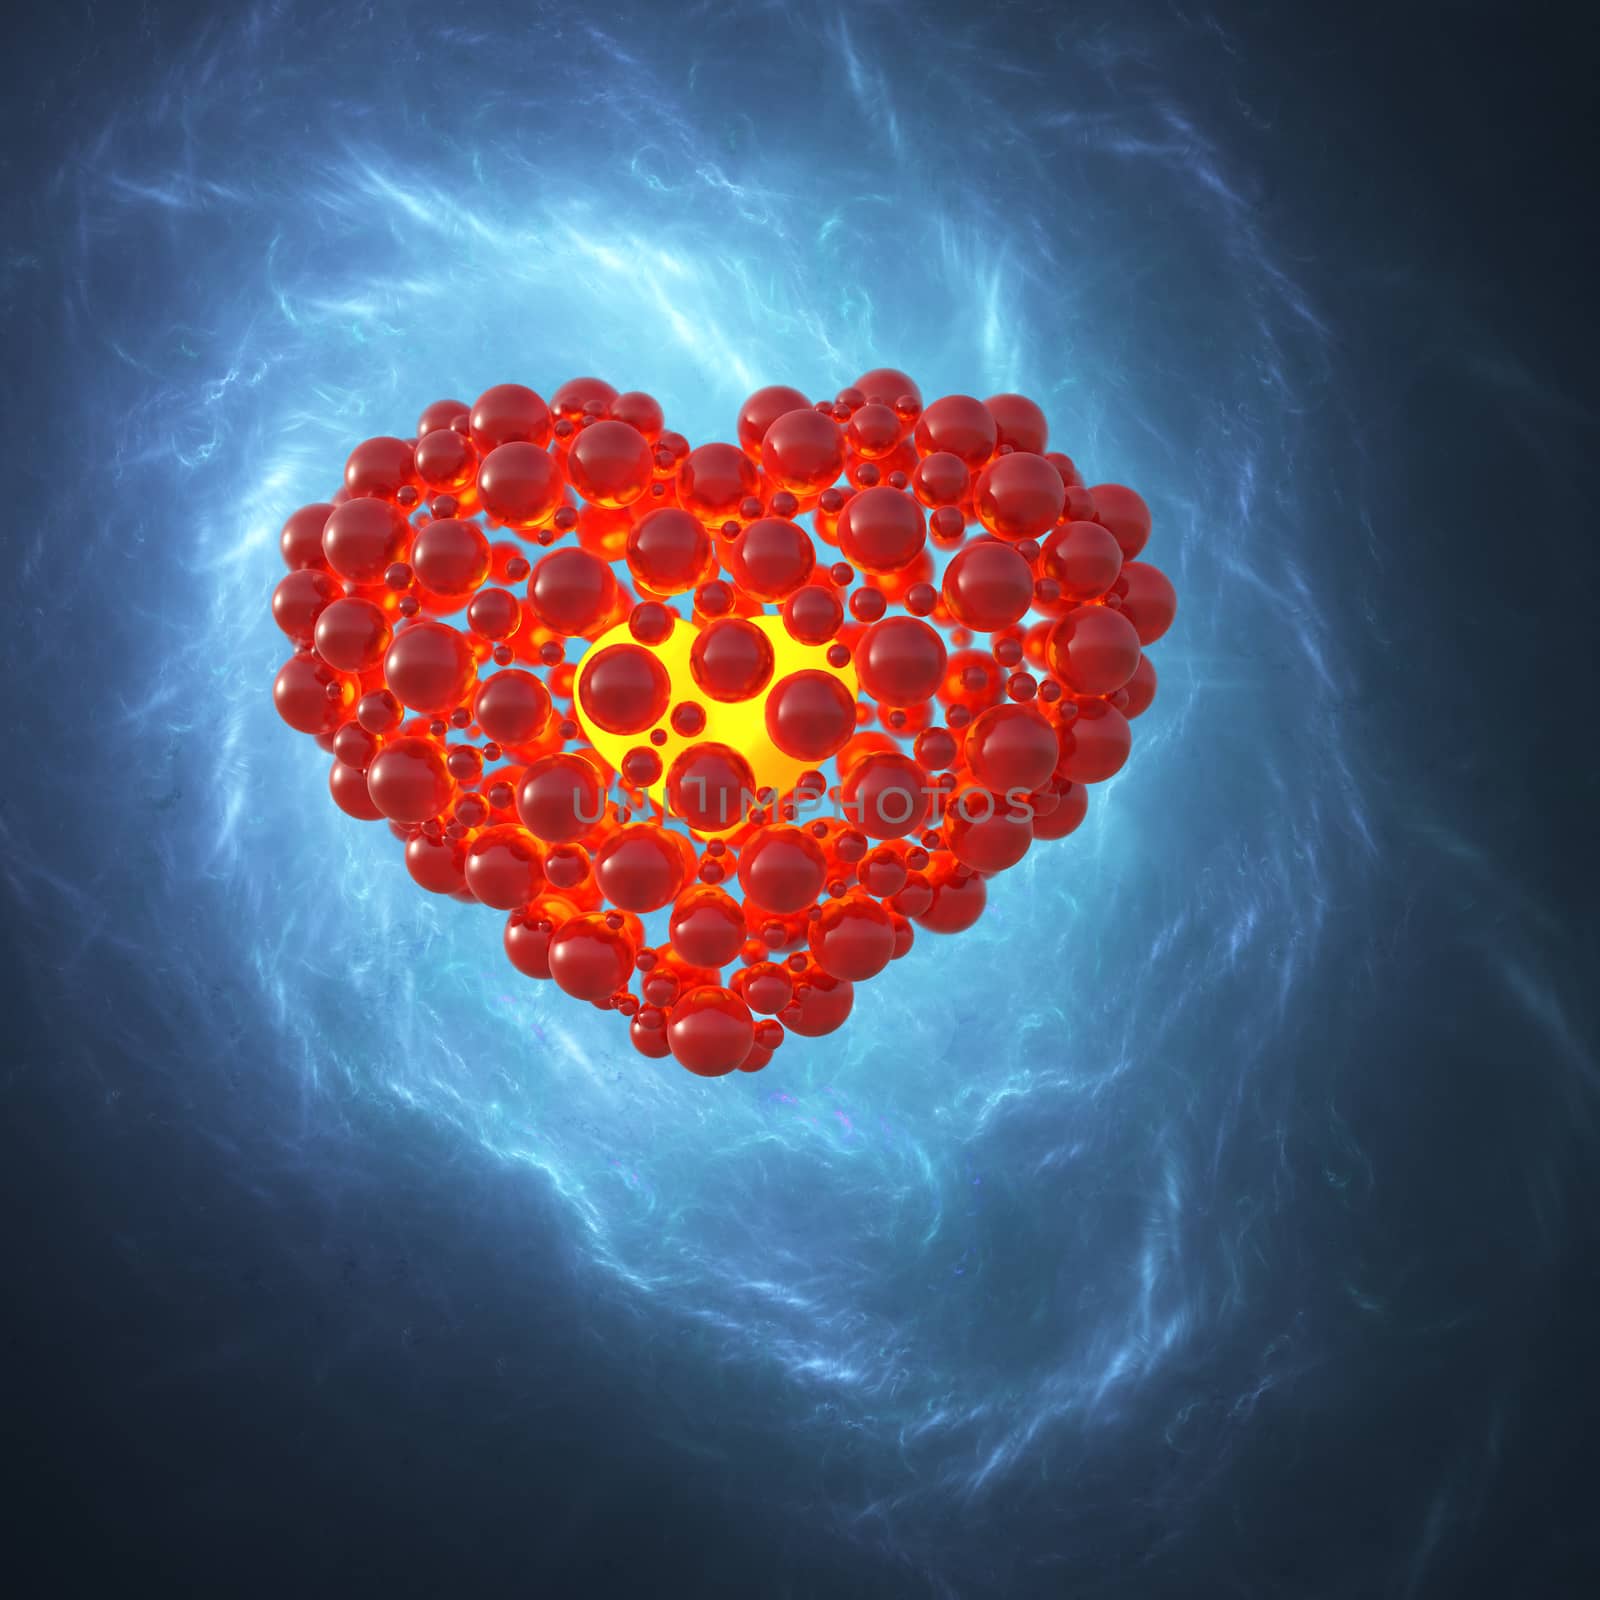 Red heart made of spheres with reflections isolated on blue galaxy space background. Happy valentines day 3d illustration by skrotov